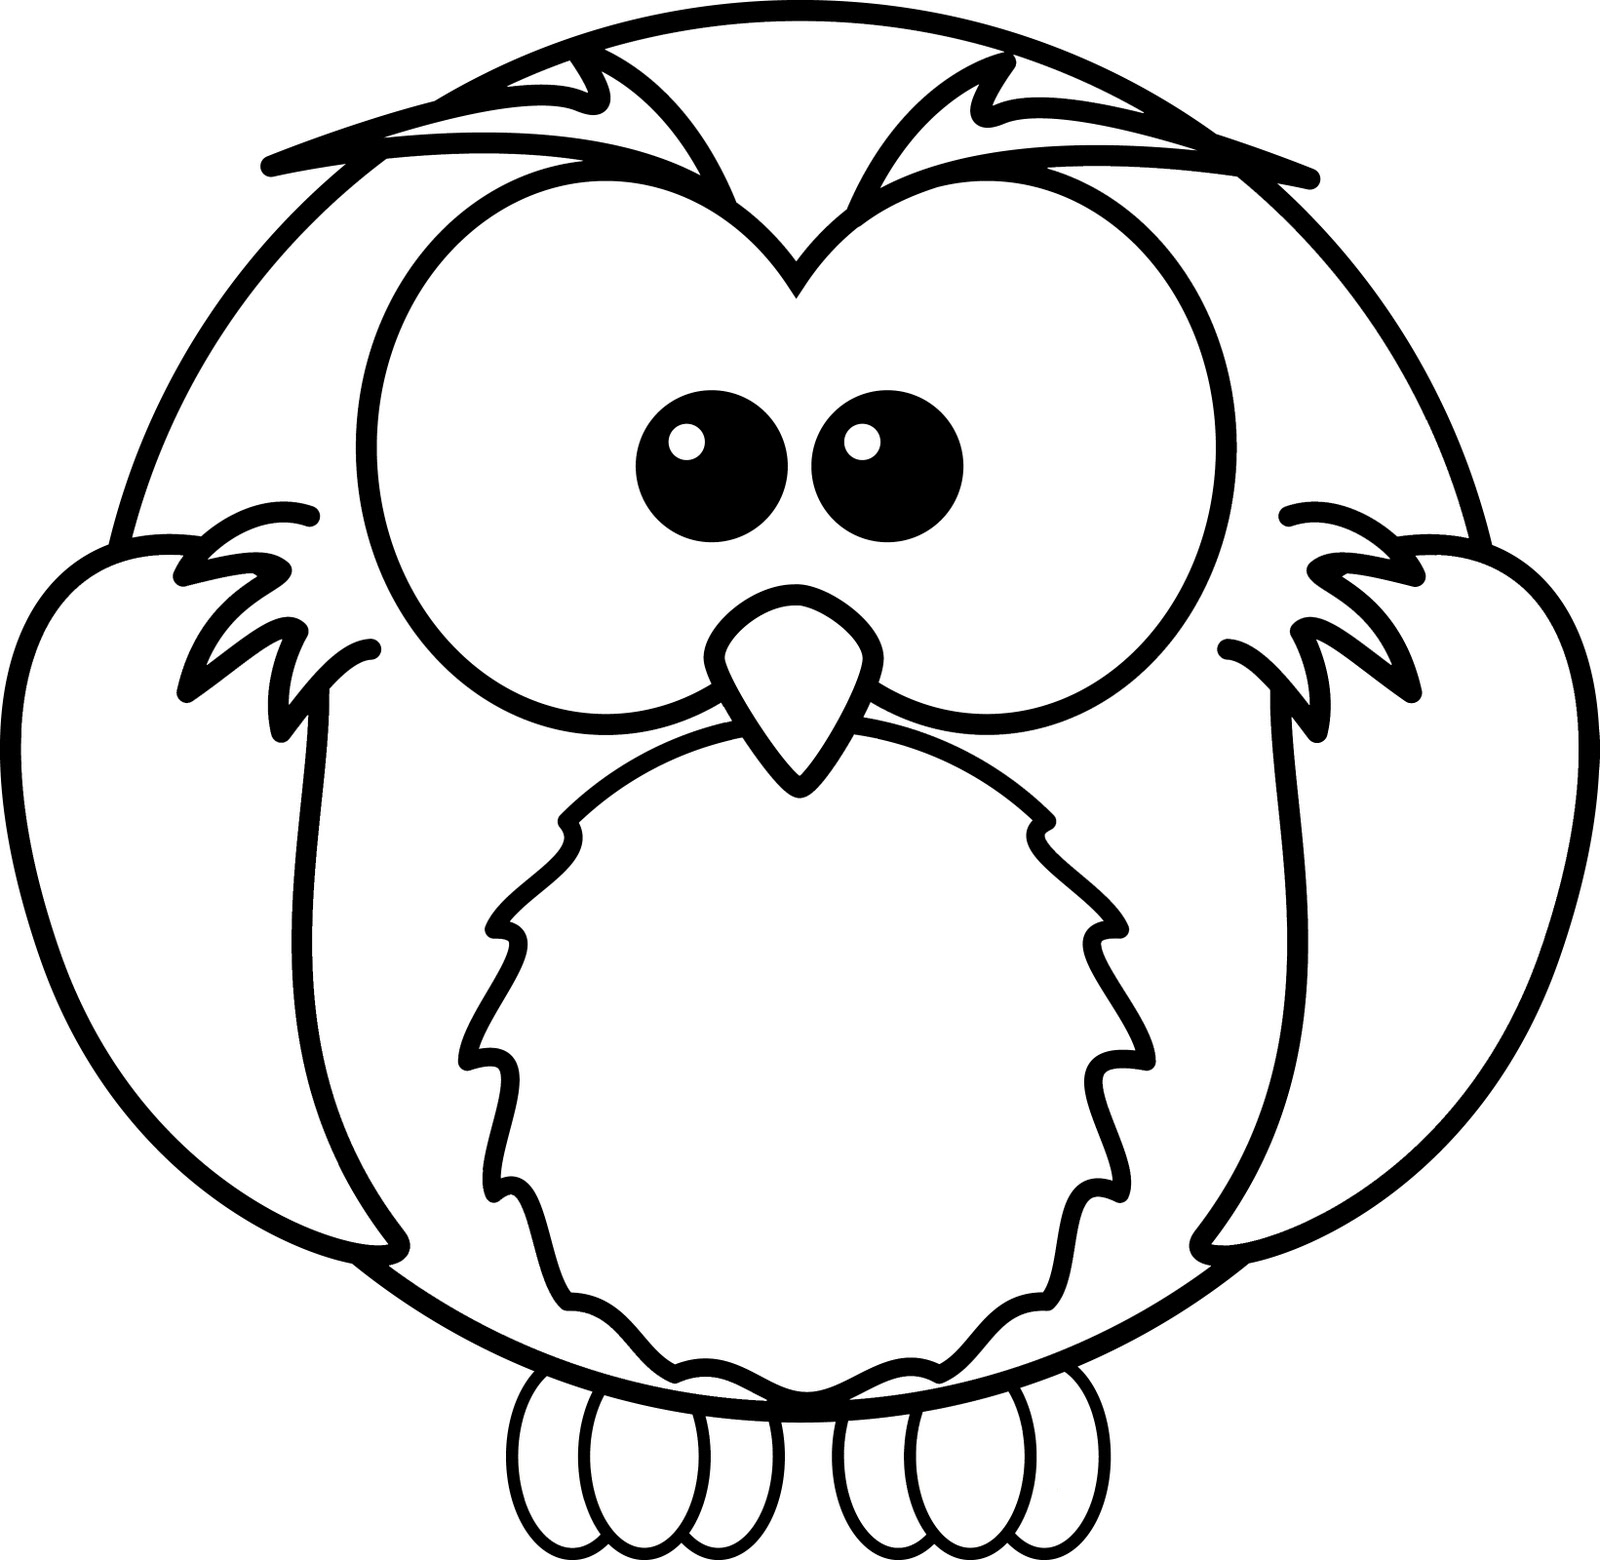 coloring pages owl januari 2012 owl coloring pages 